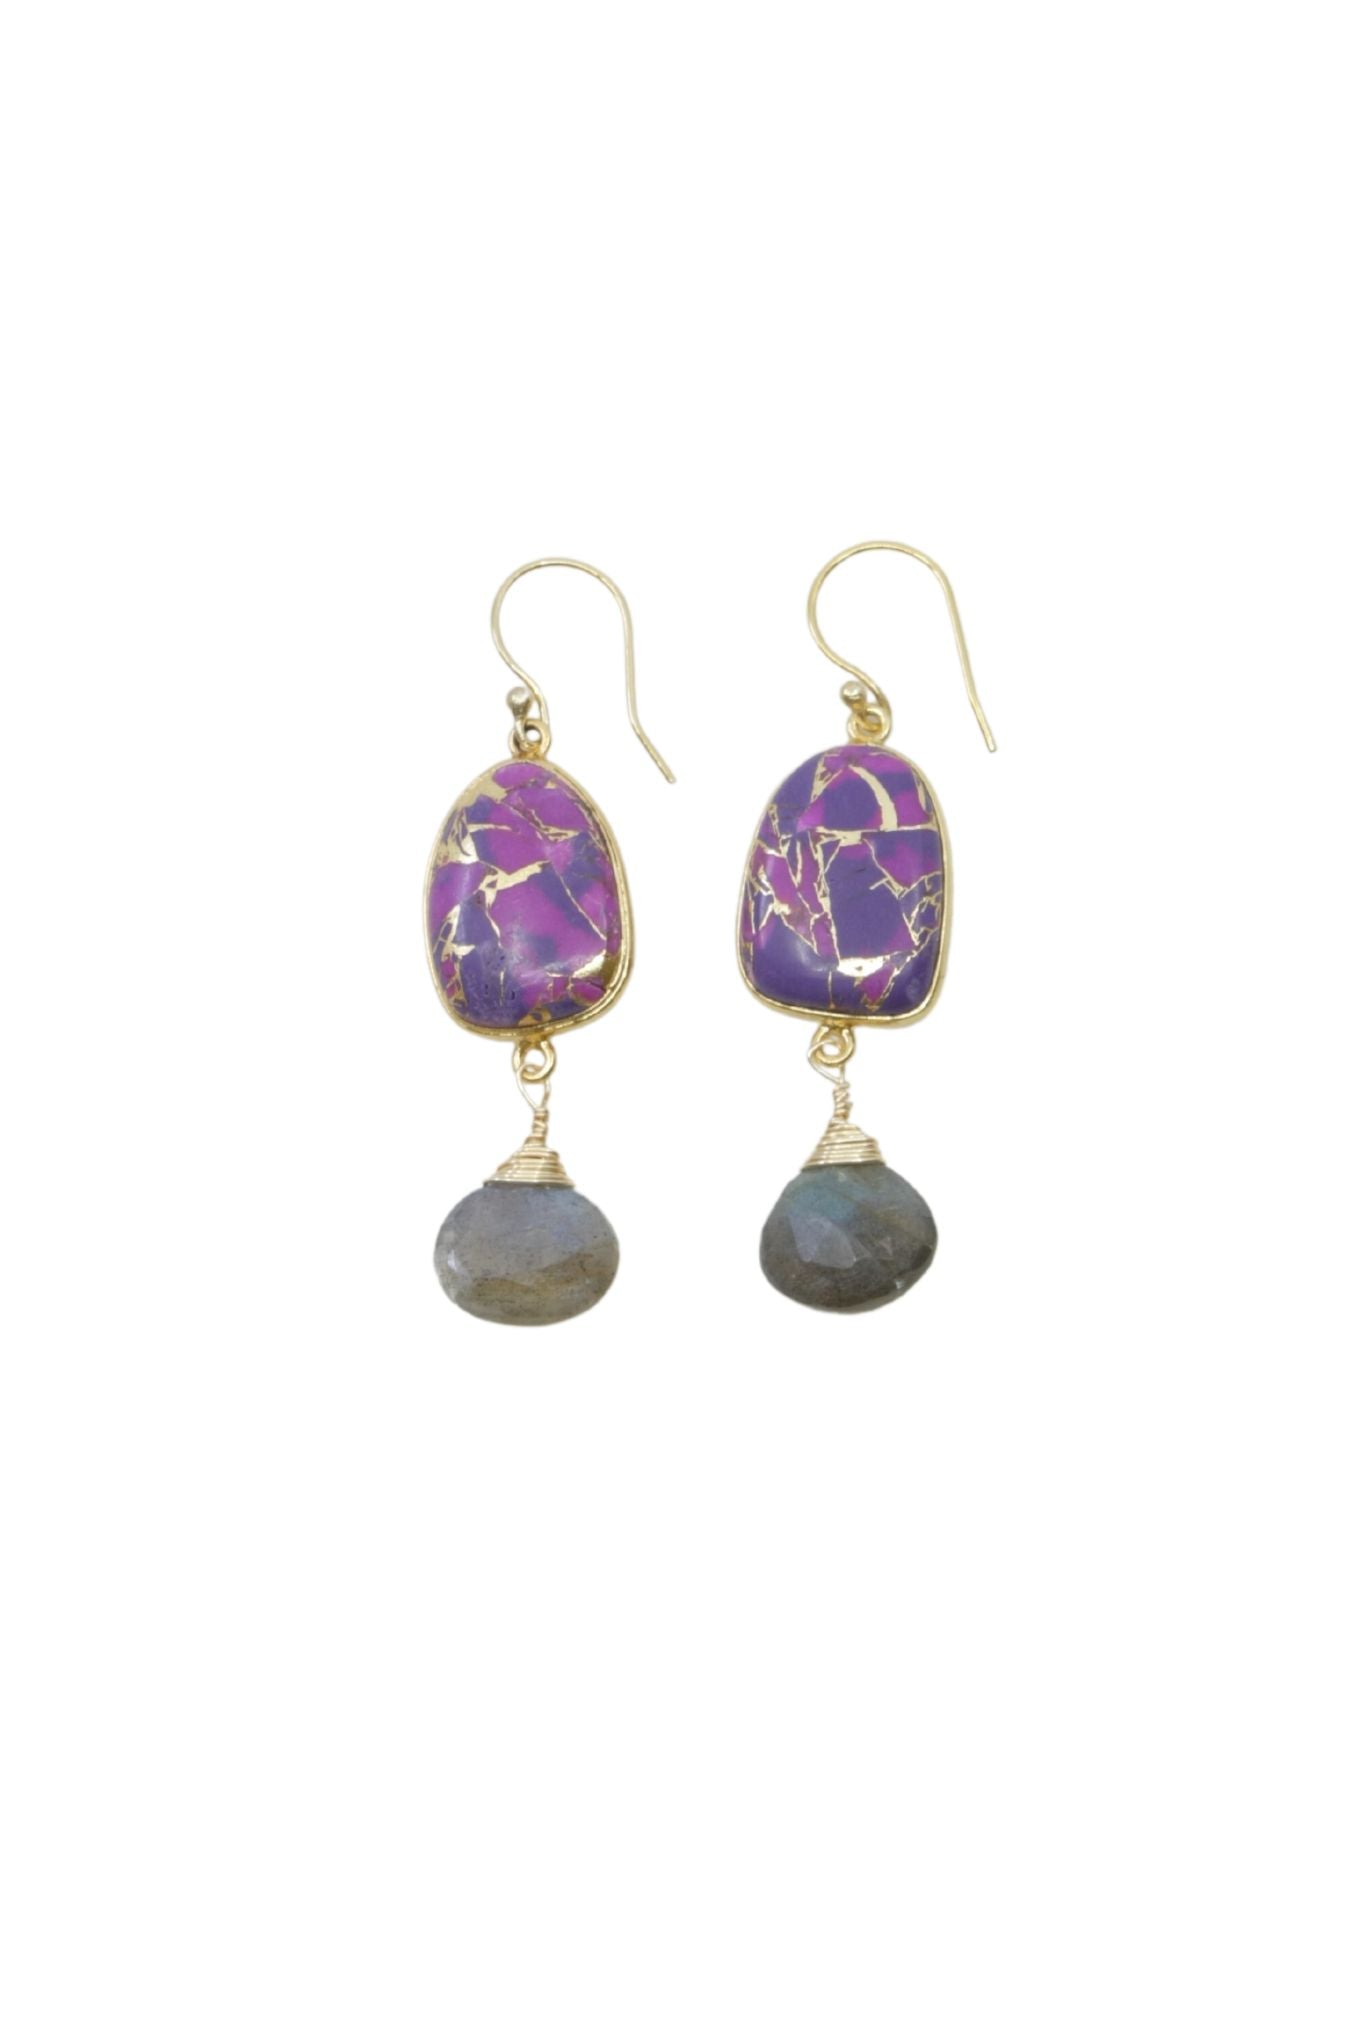 Victoria Earrings in Purple Turquoise Mojave and Labradorite in Gold